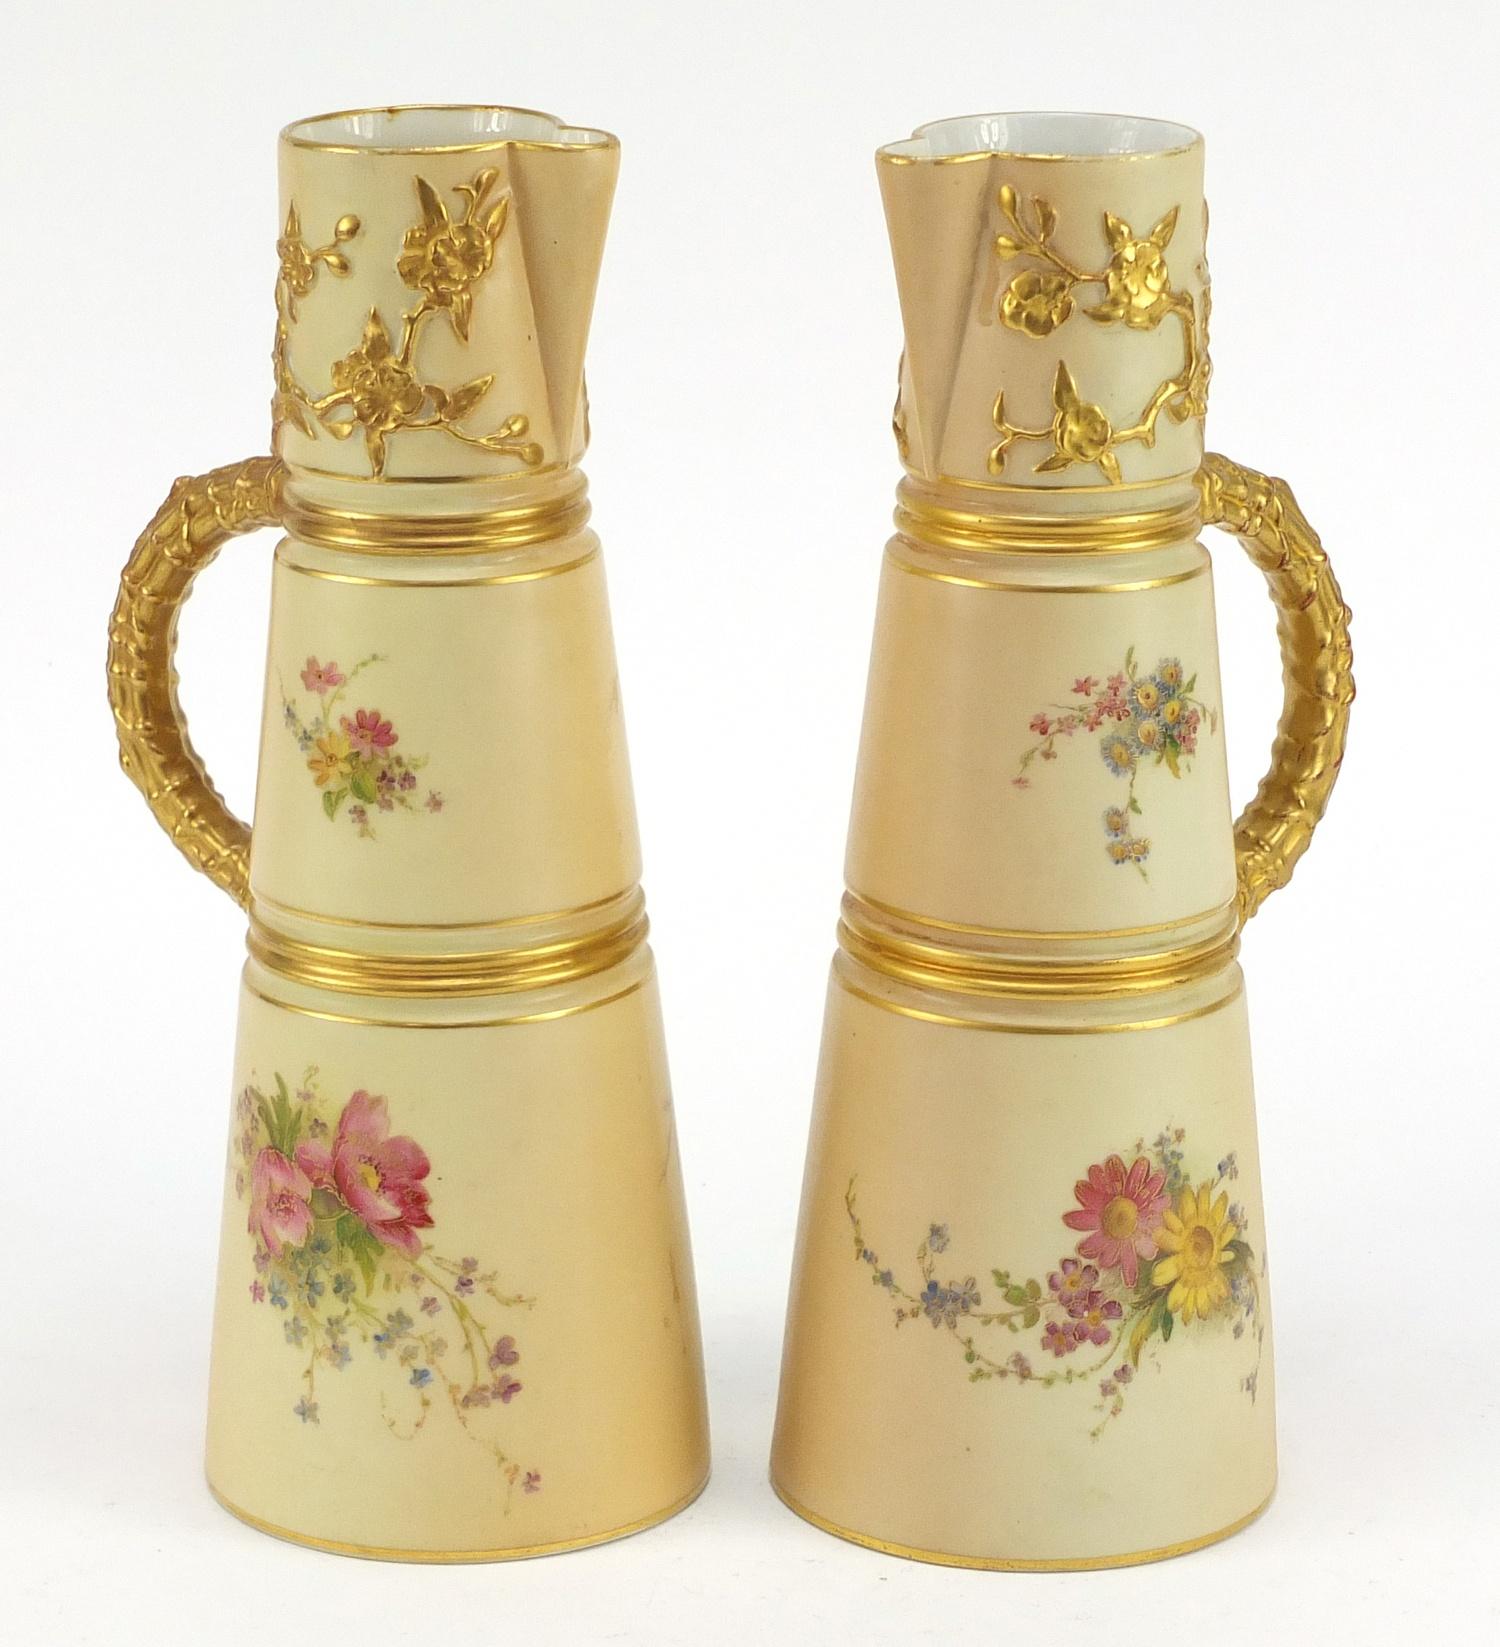 Pair of Royal Worcester blush ivory jugs with tapering bodies, each hand painted and gilded with